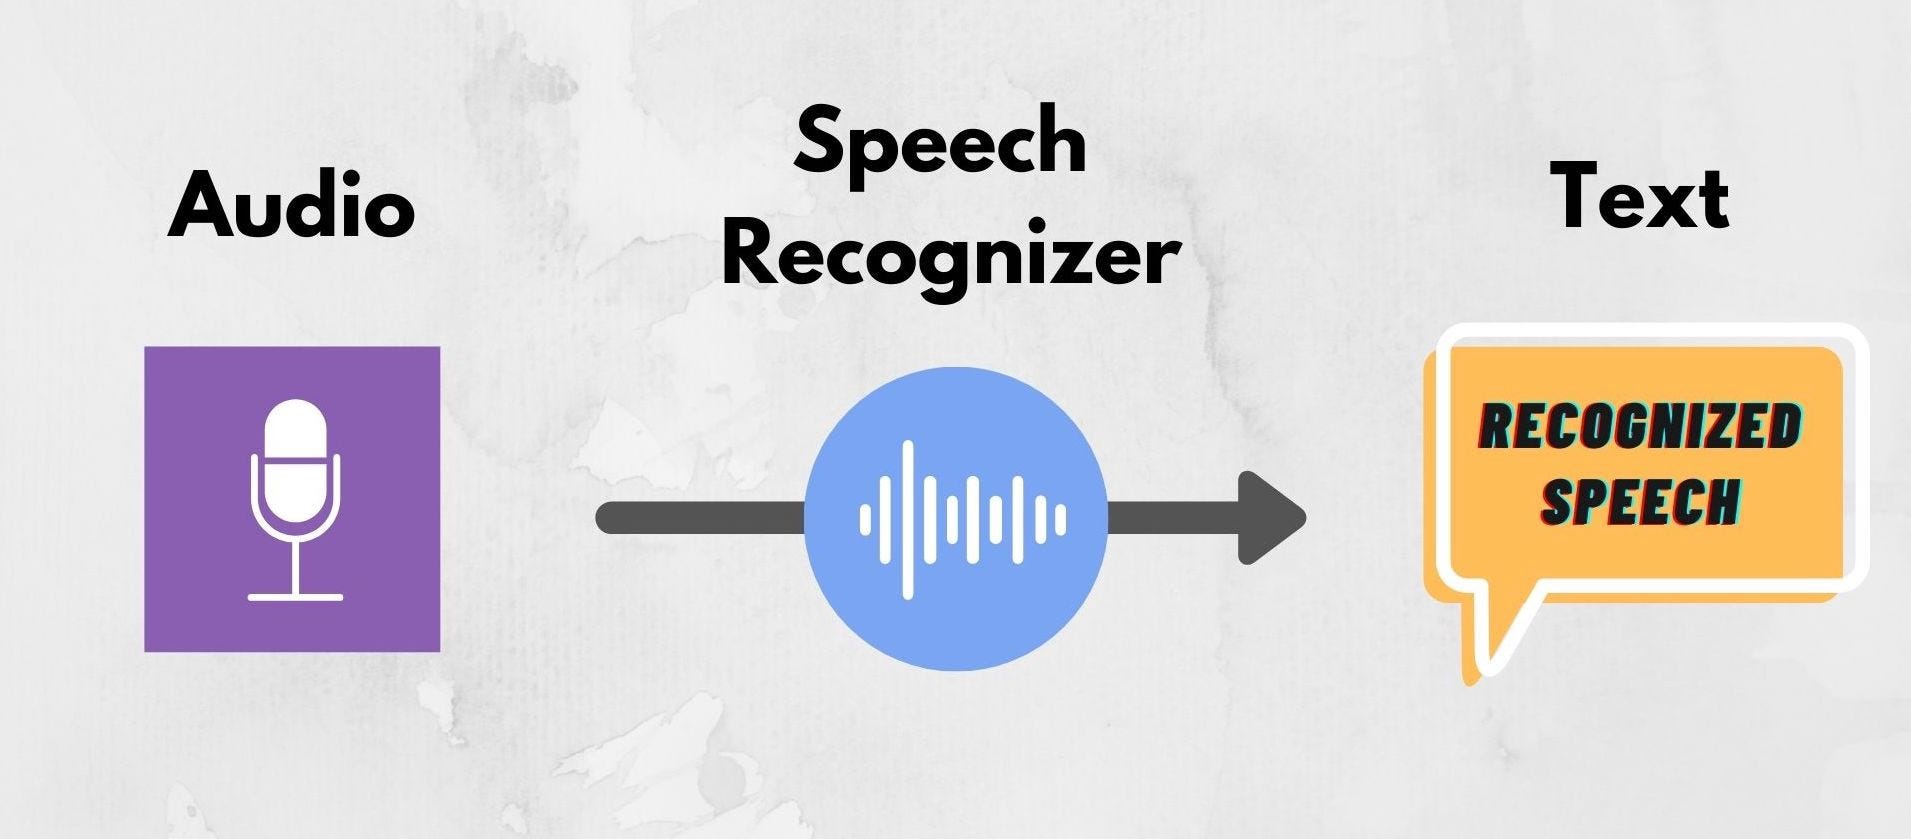 speech recognition test example